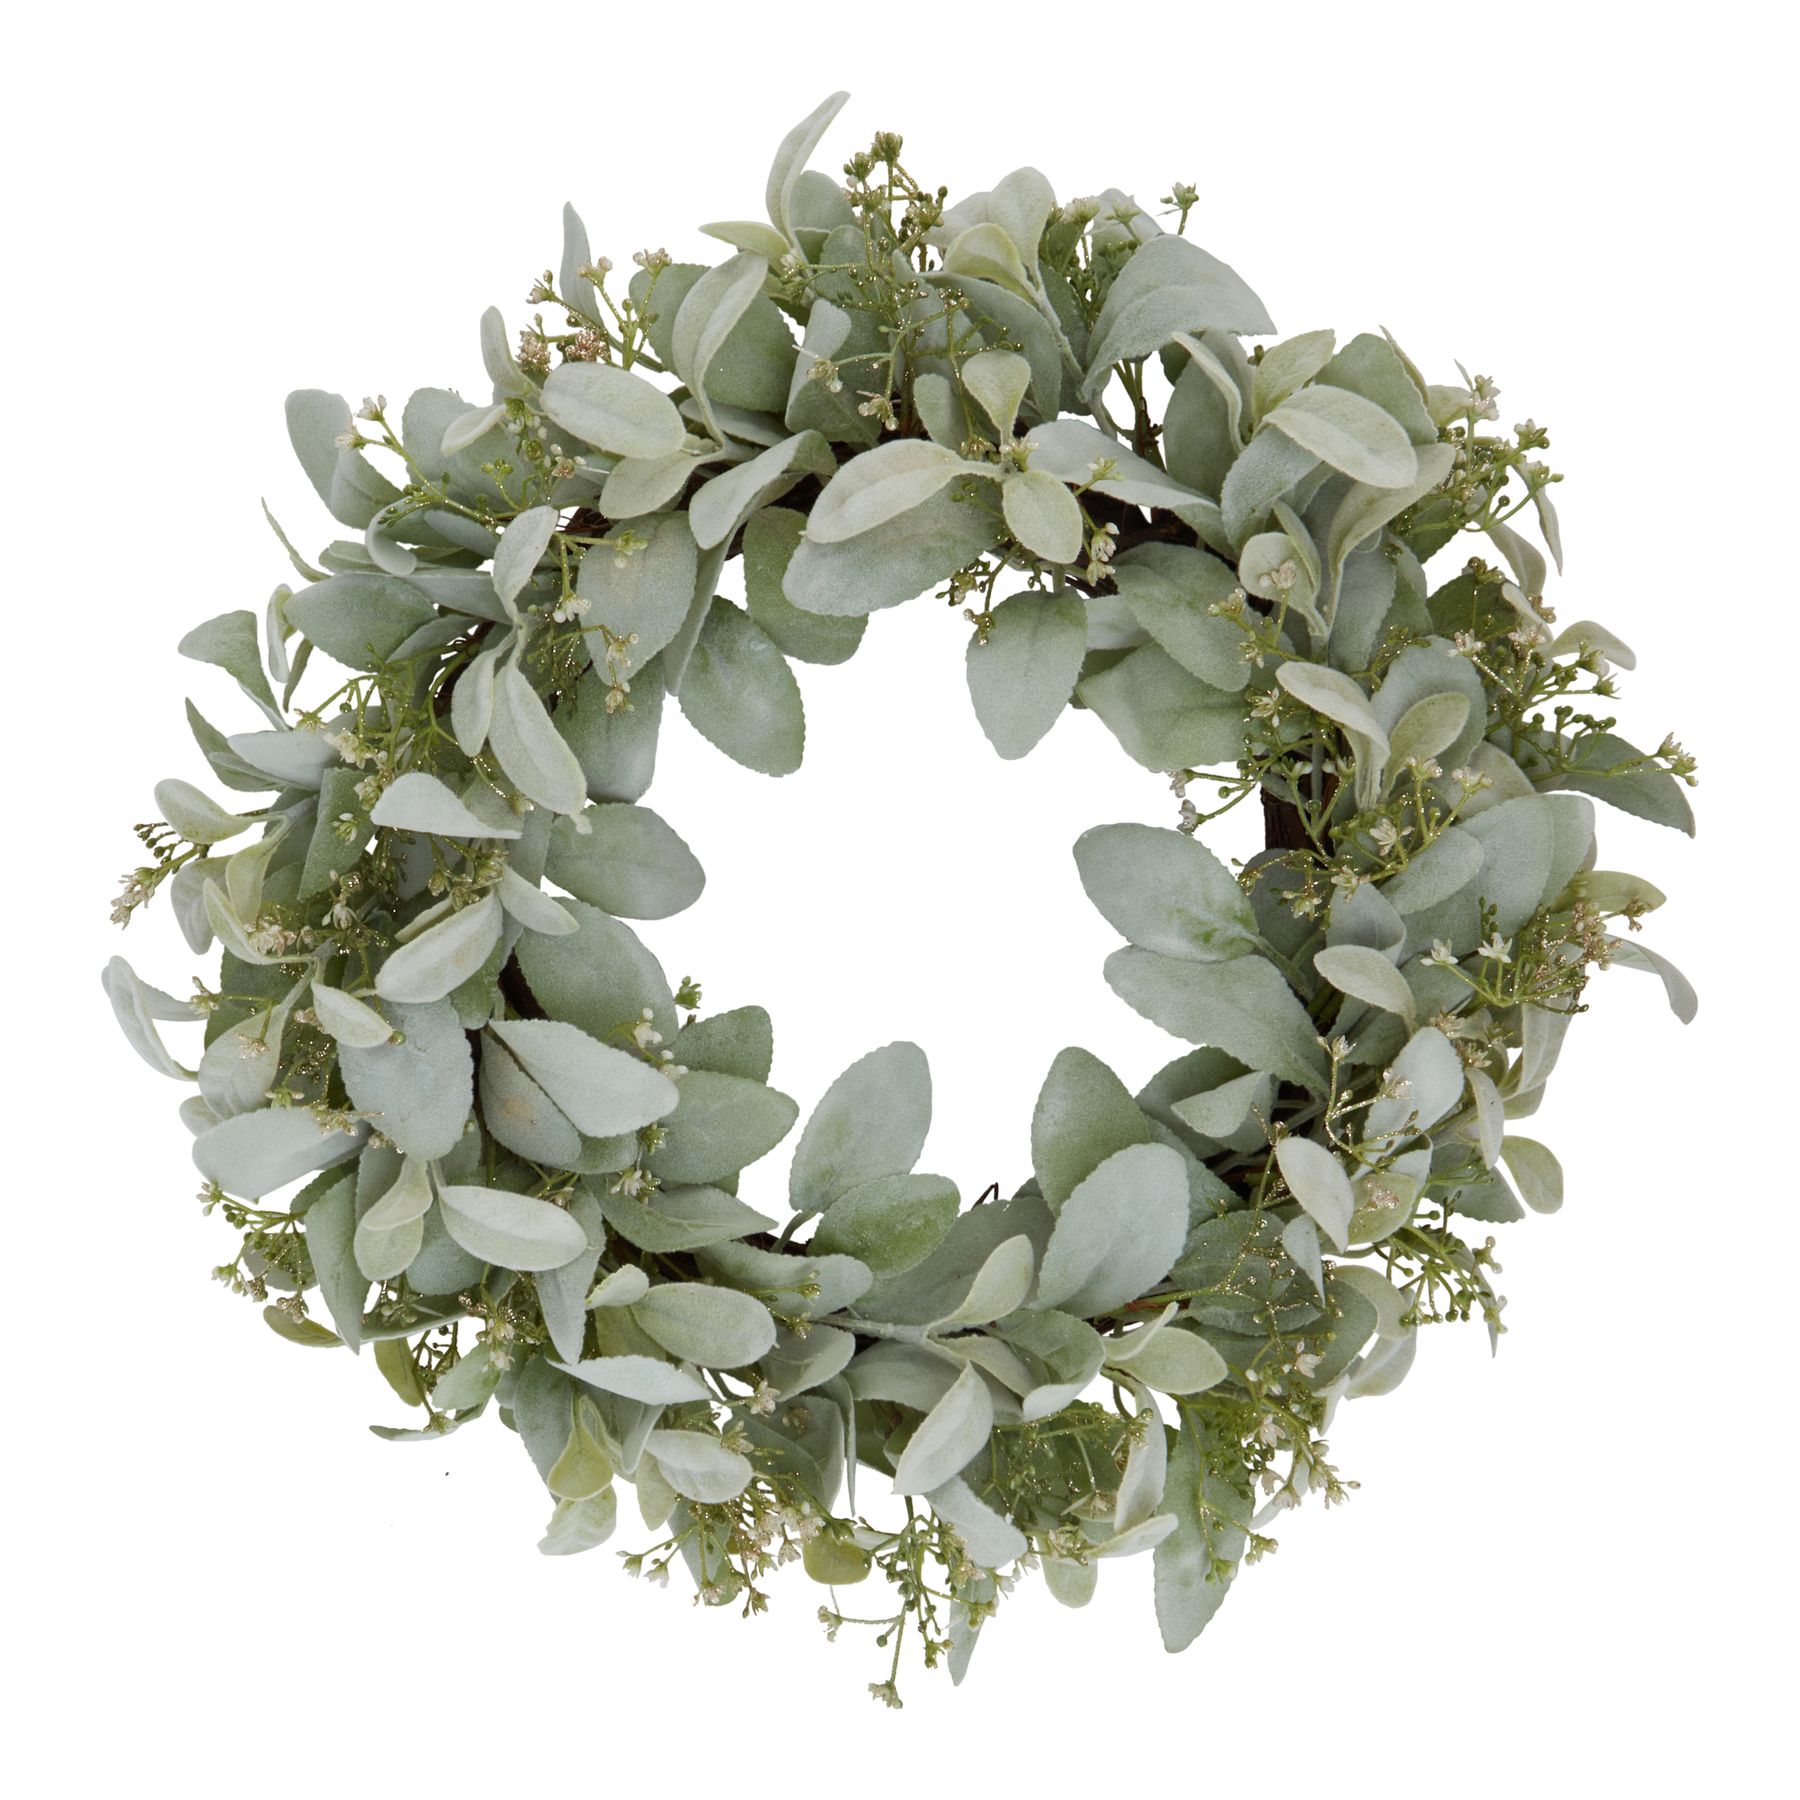 Winter Wreath With Lambs Ear And Wax Flower - Image 1